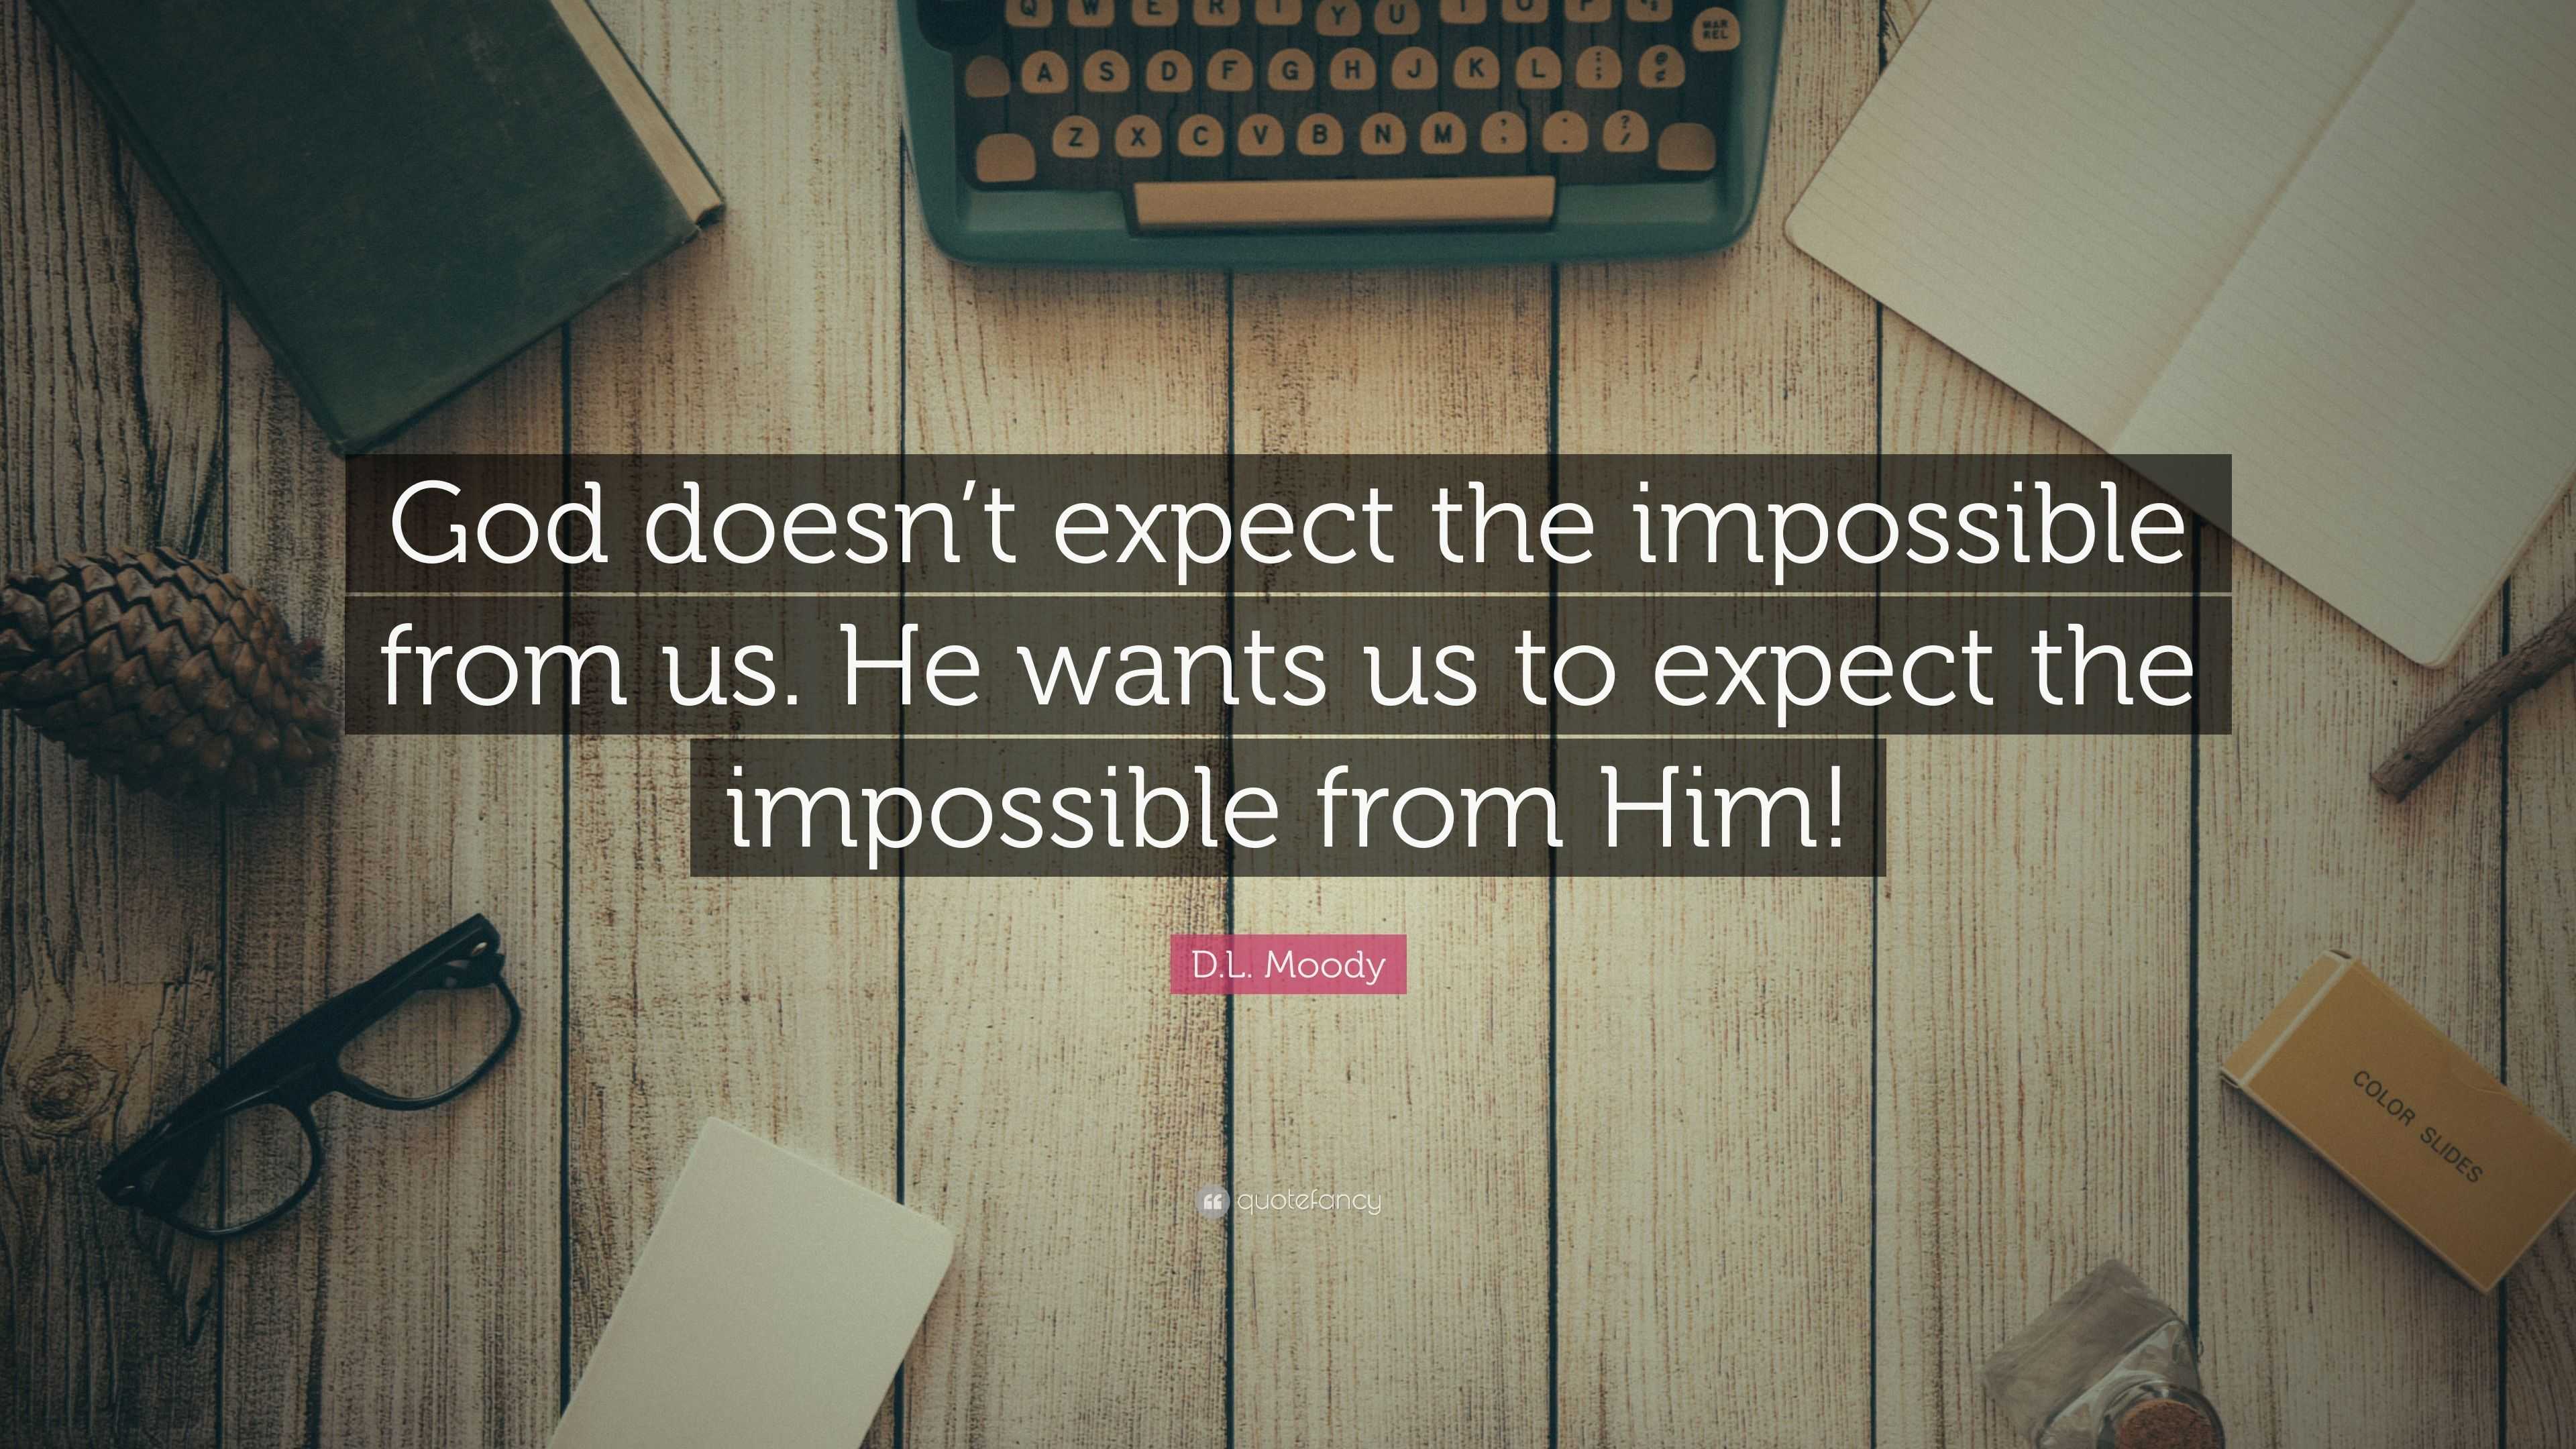 D.L. Moody Quote: “God doesn’t expect the impossible from us. He wants ...